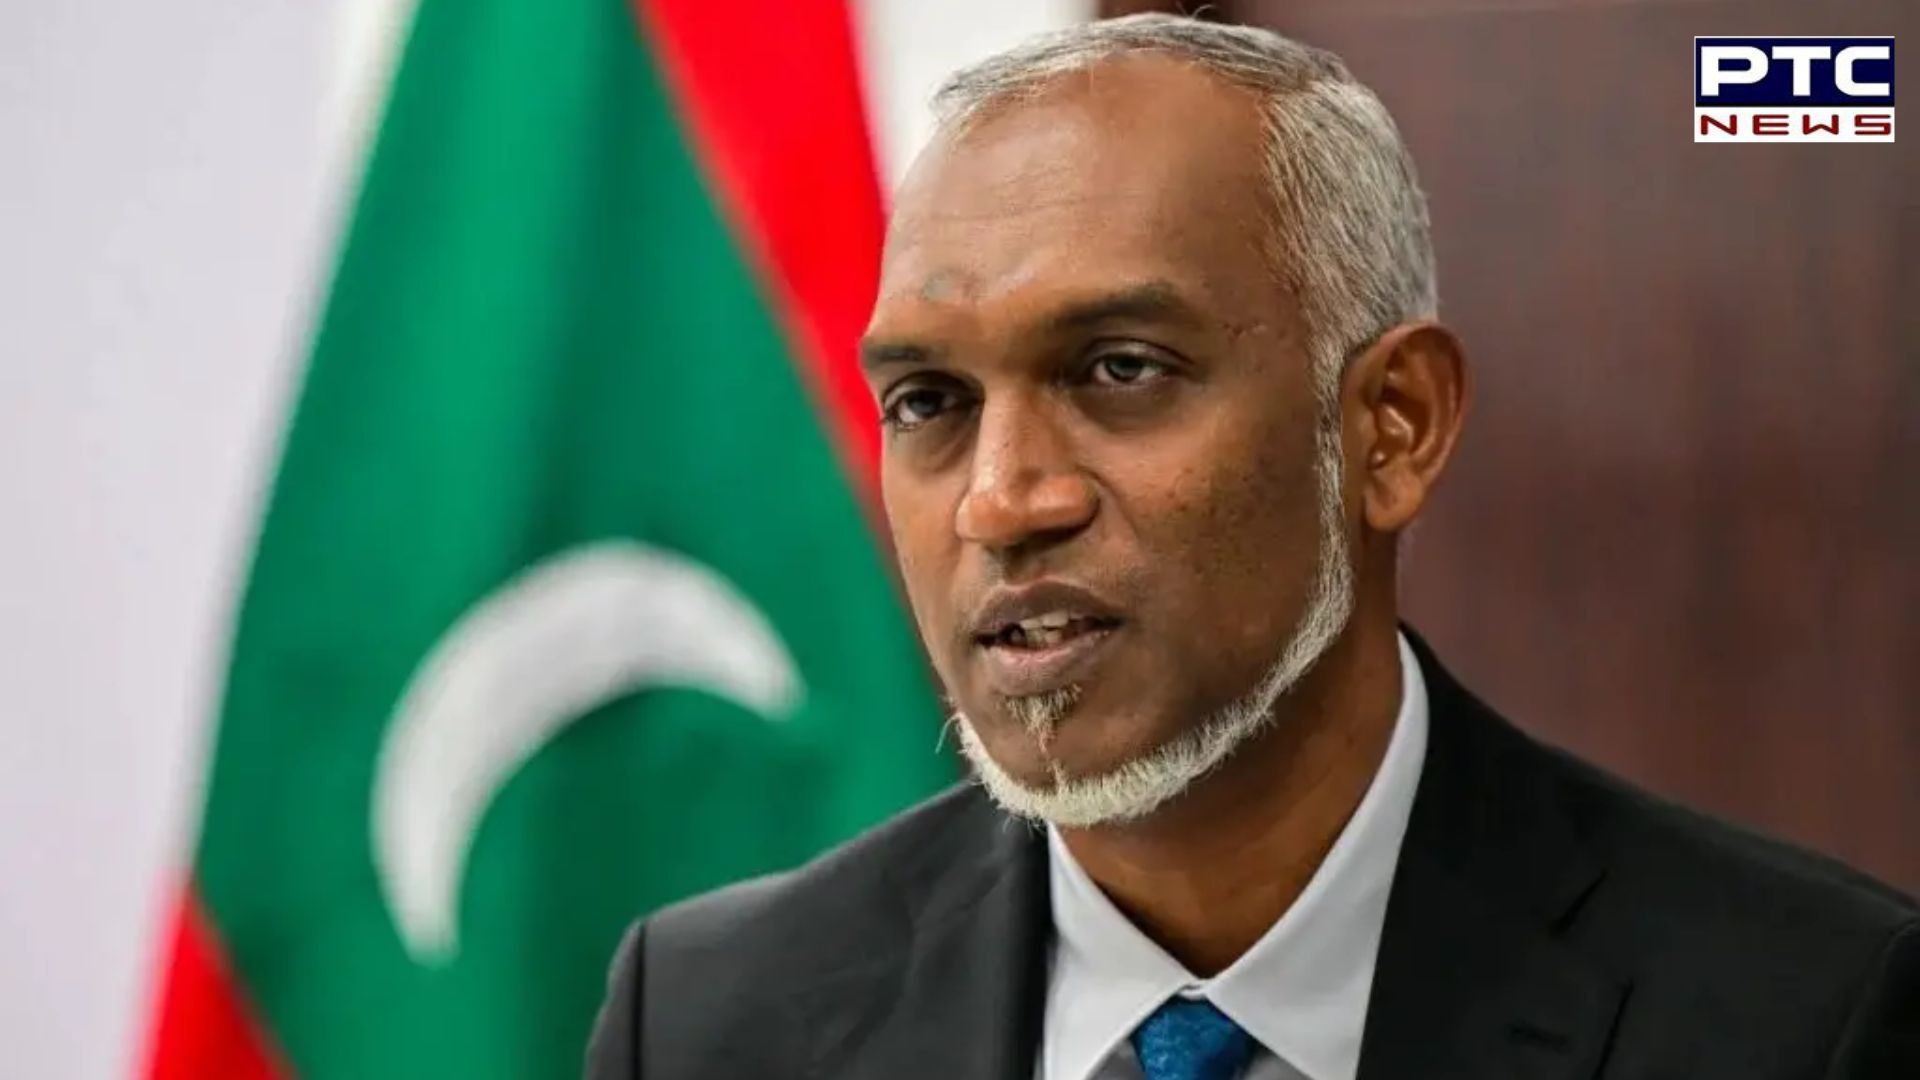 Maldives parties boycott President for 'anti-India stance'